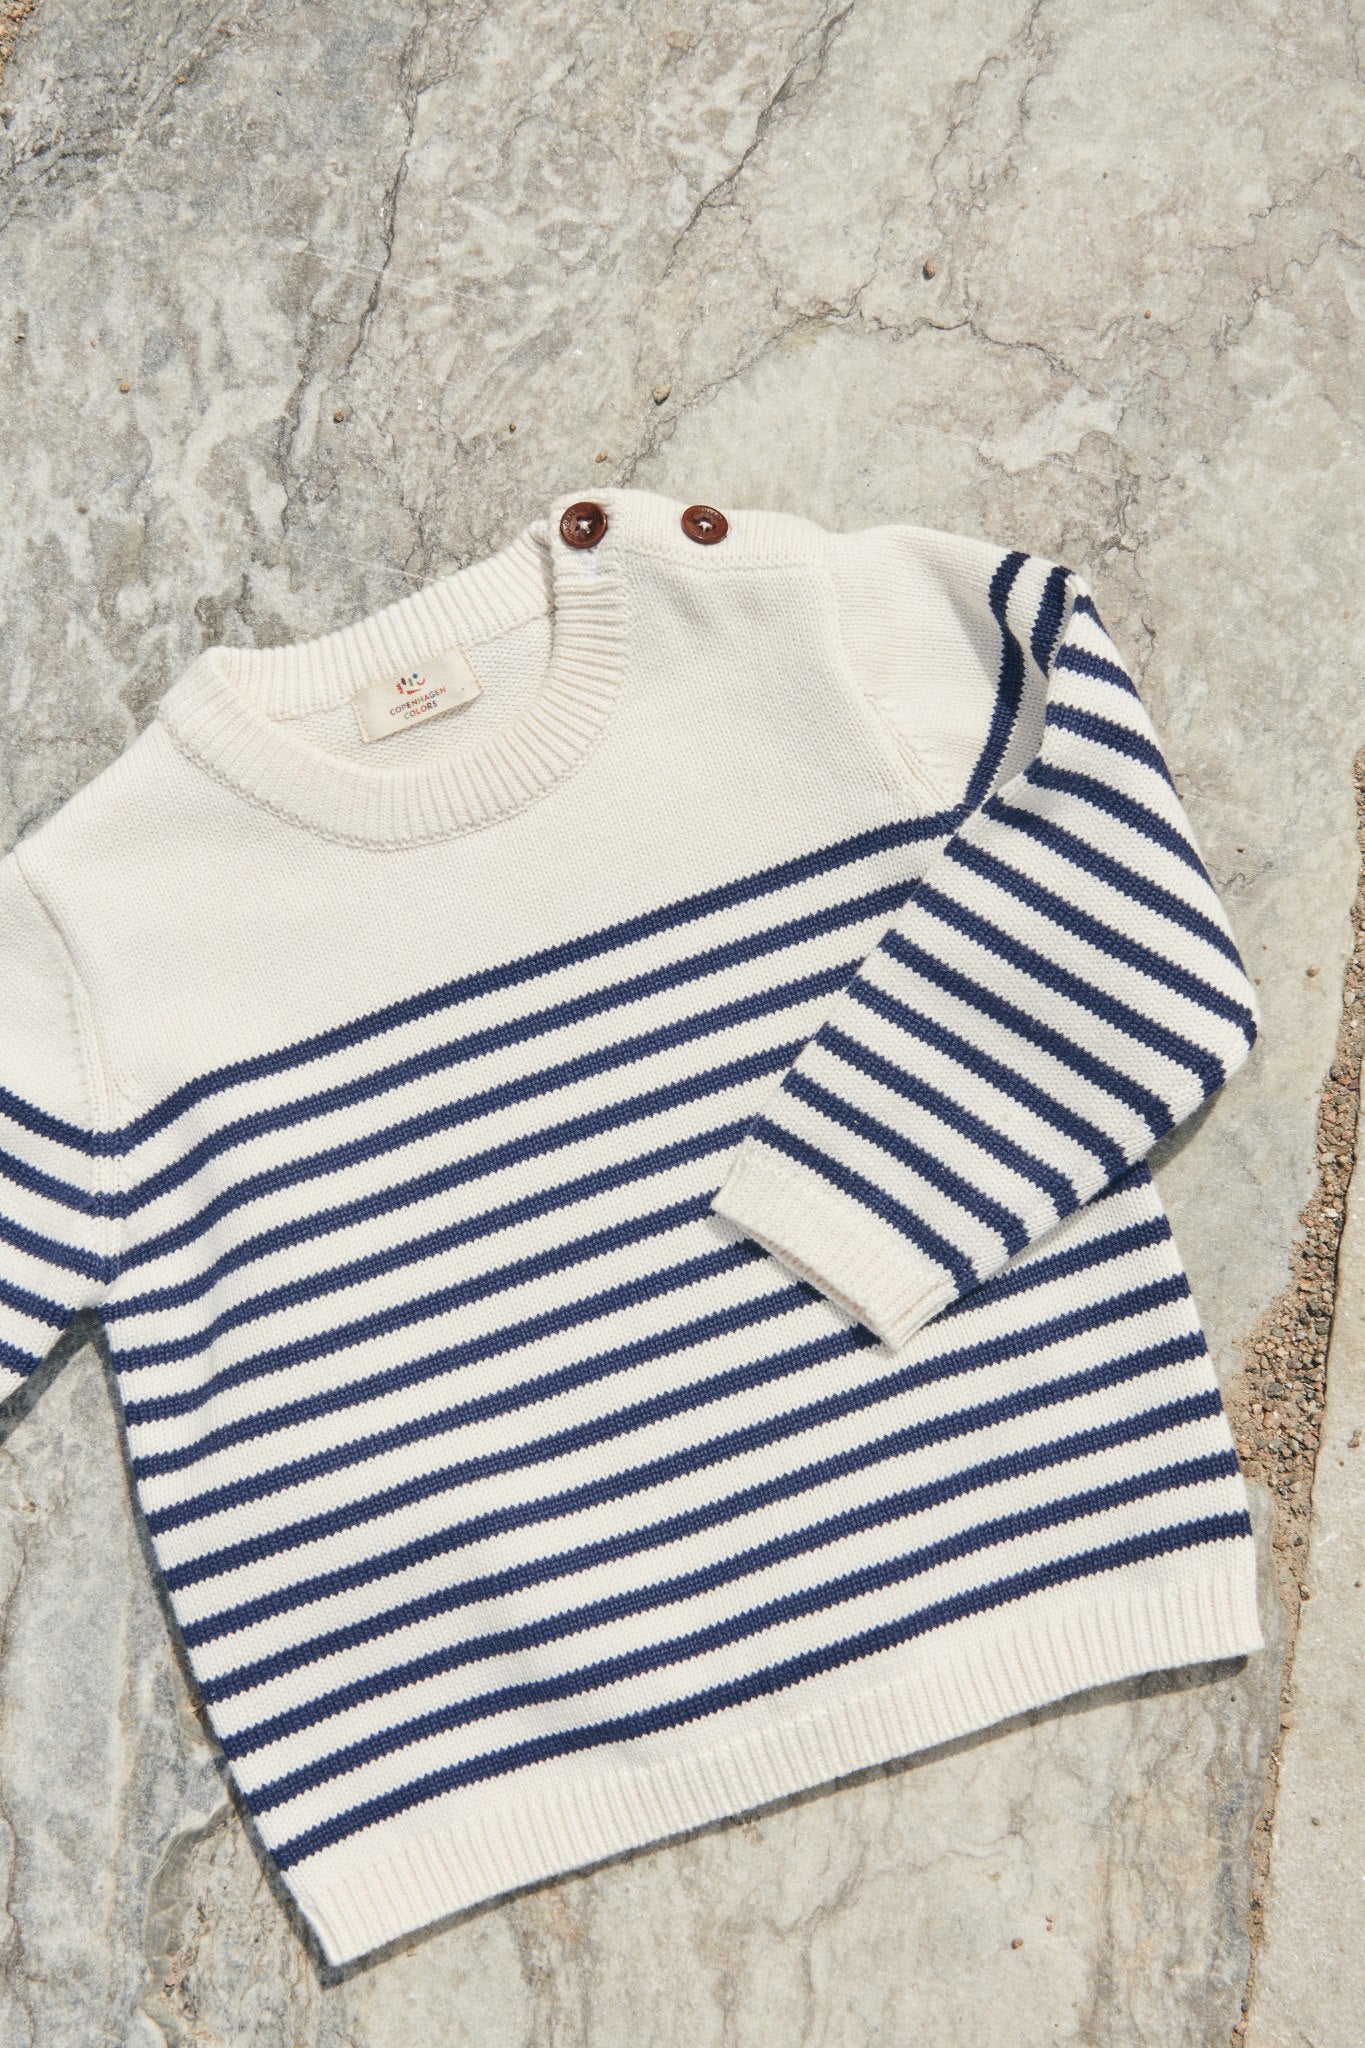 KNITTED STRIPED SAILOR JUMPER - CREAM NAVY COMBI